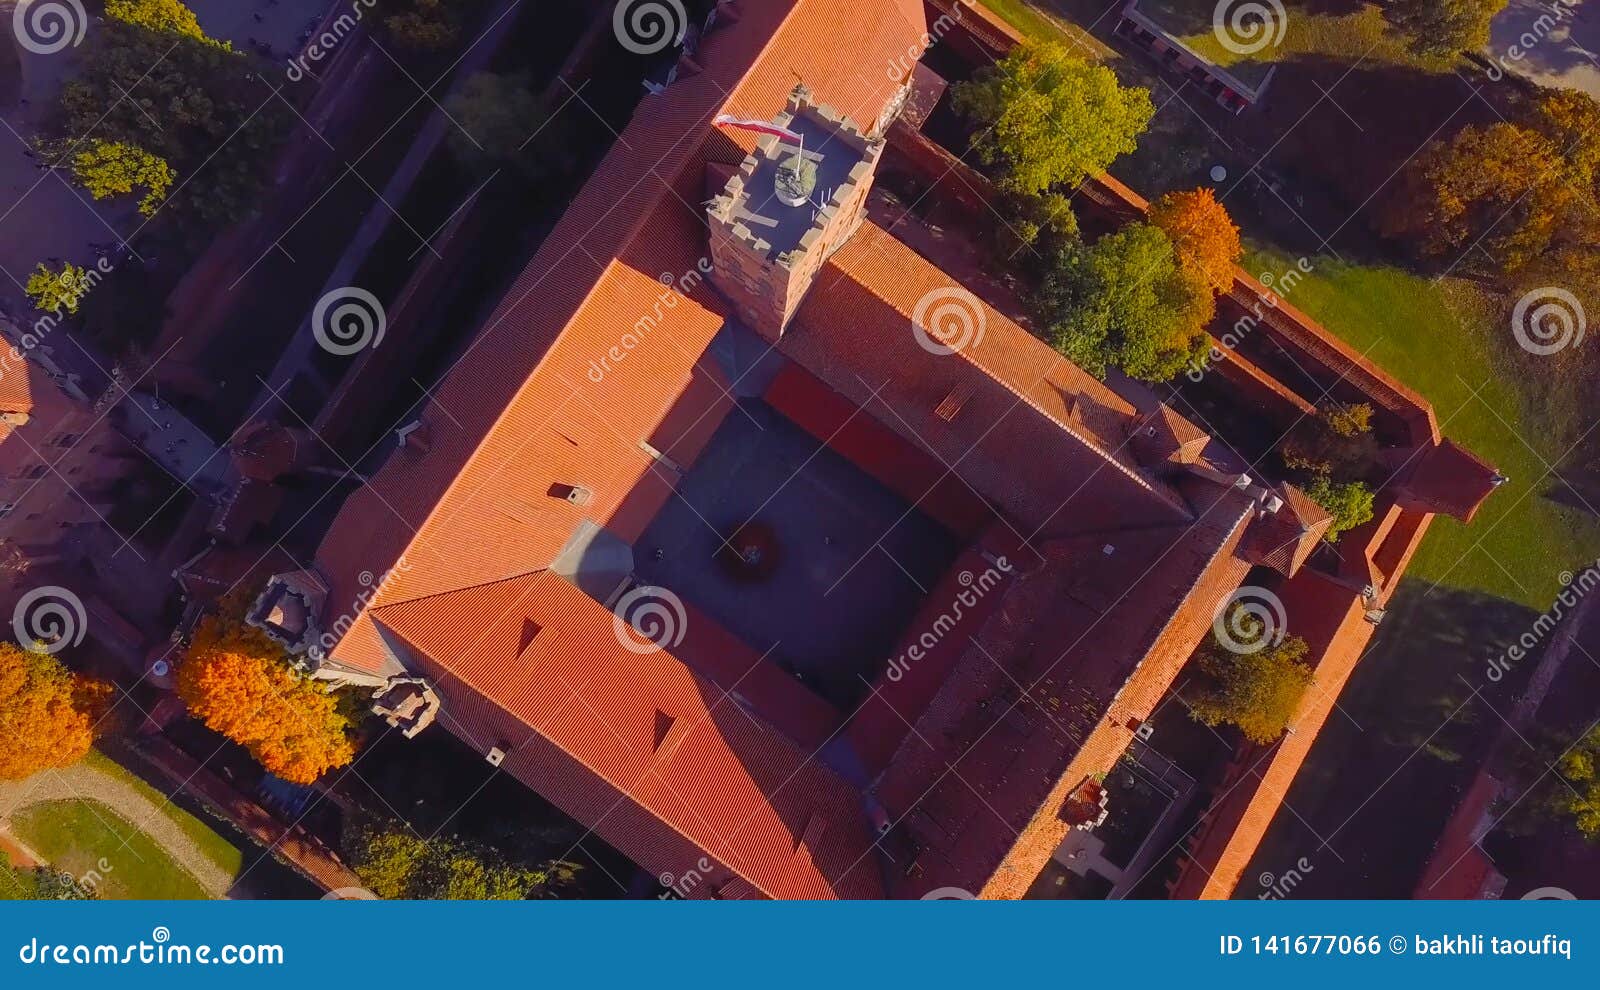 the roof of an old building in poland. the color of the wall is red in the traditional style